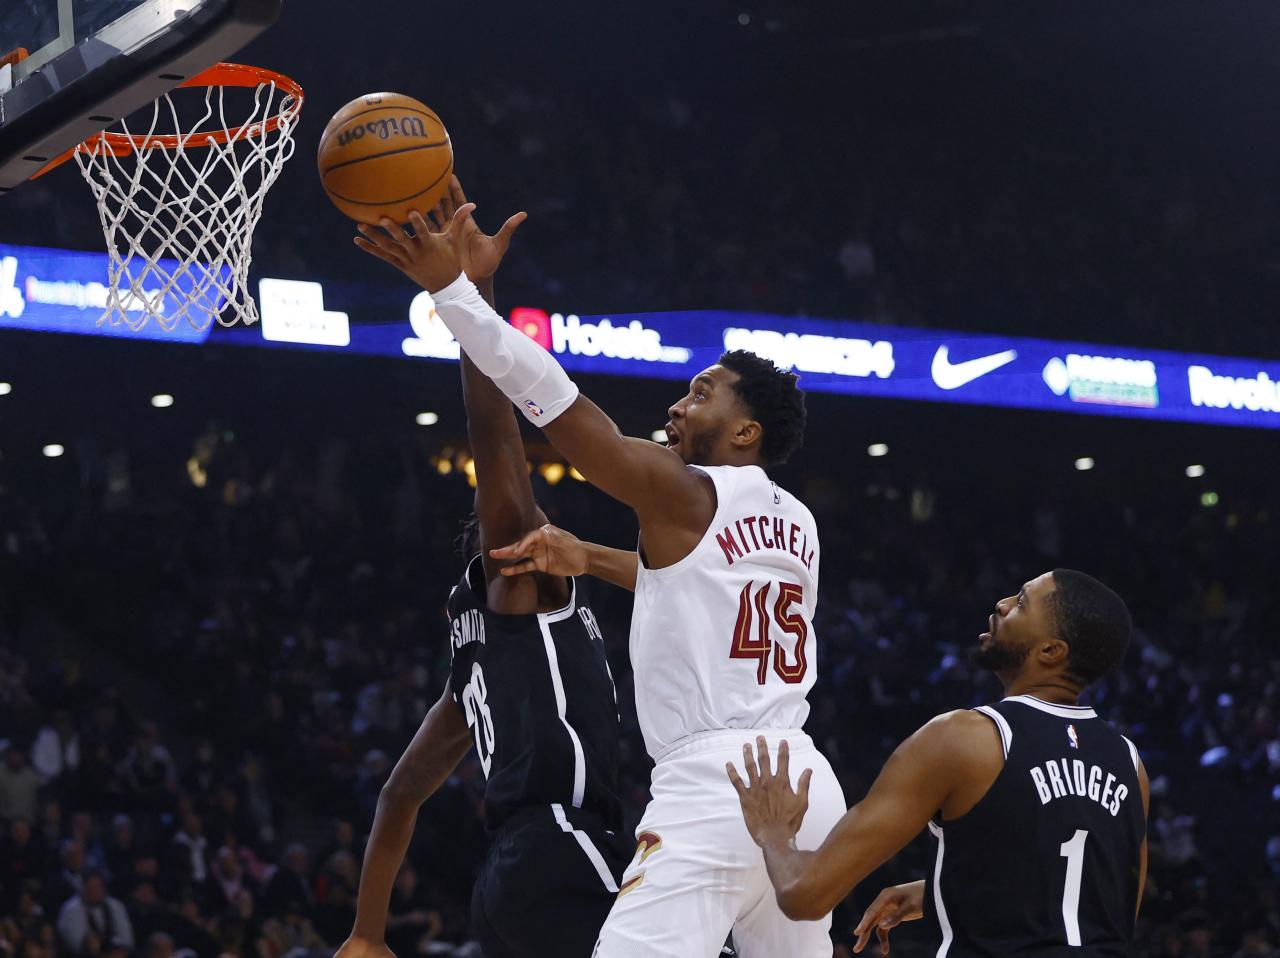 Donovan Mitchell was the star of the show as Cleveland defeated Brooklyn in Paris